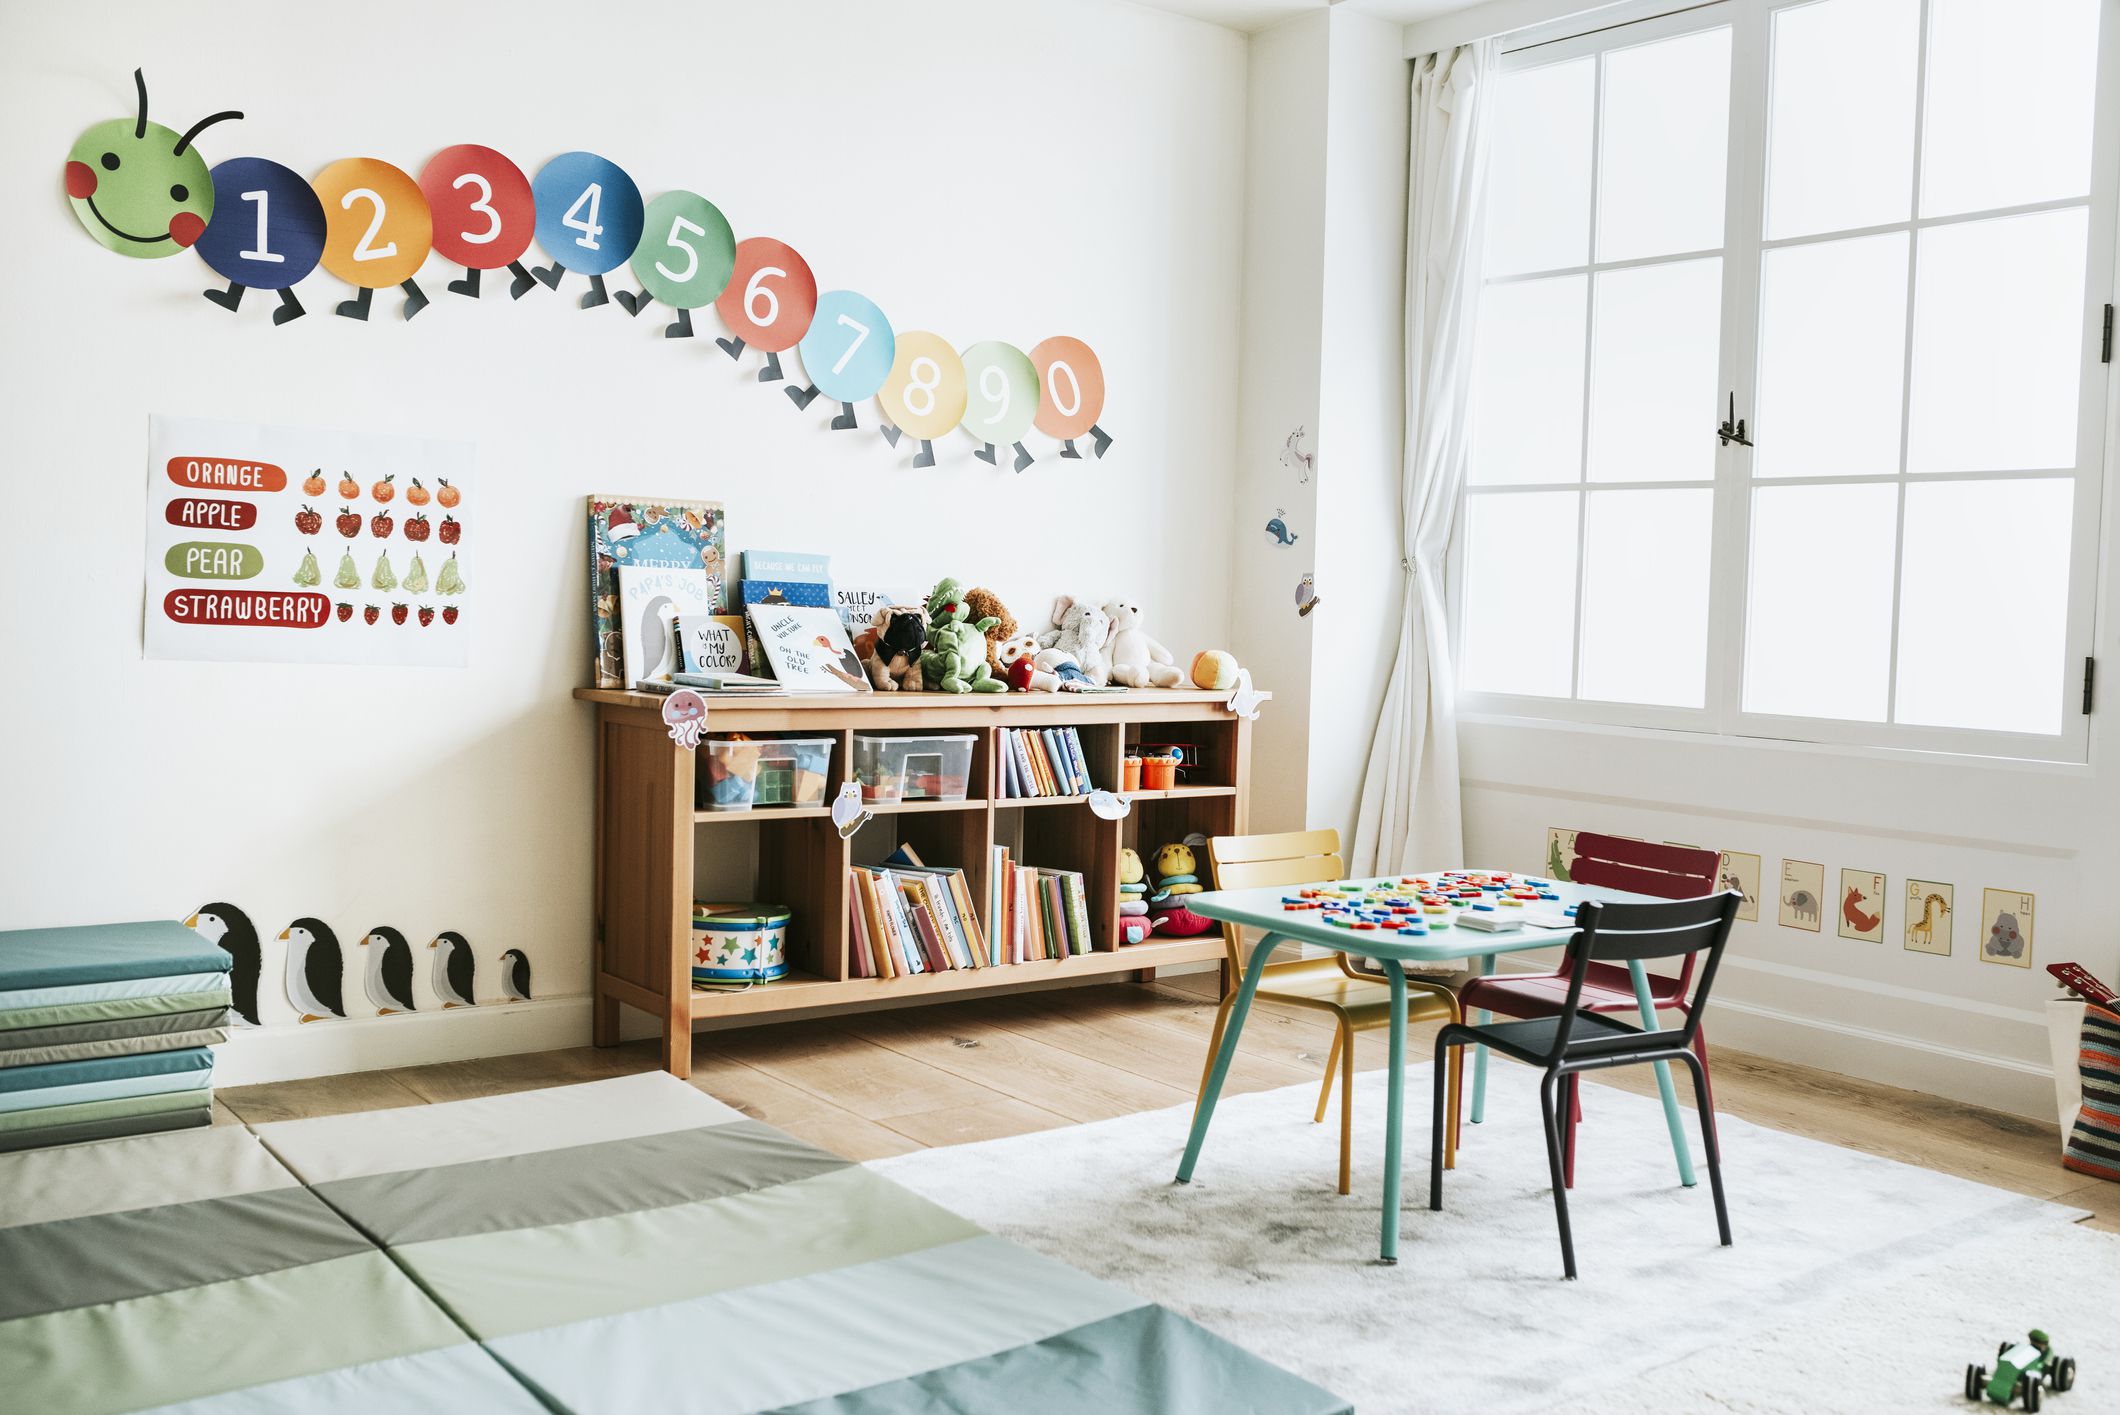 6 Ideas to Decorate a Montessori Room for Kids - Go Get Yourself